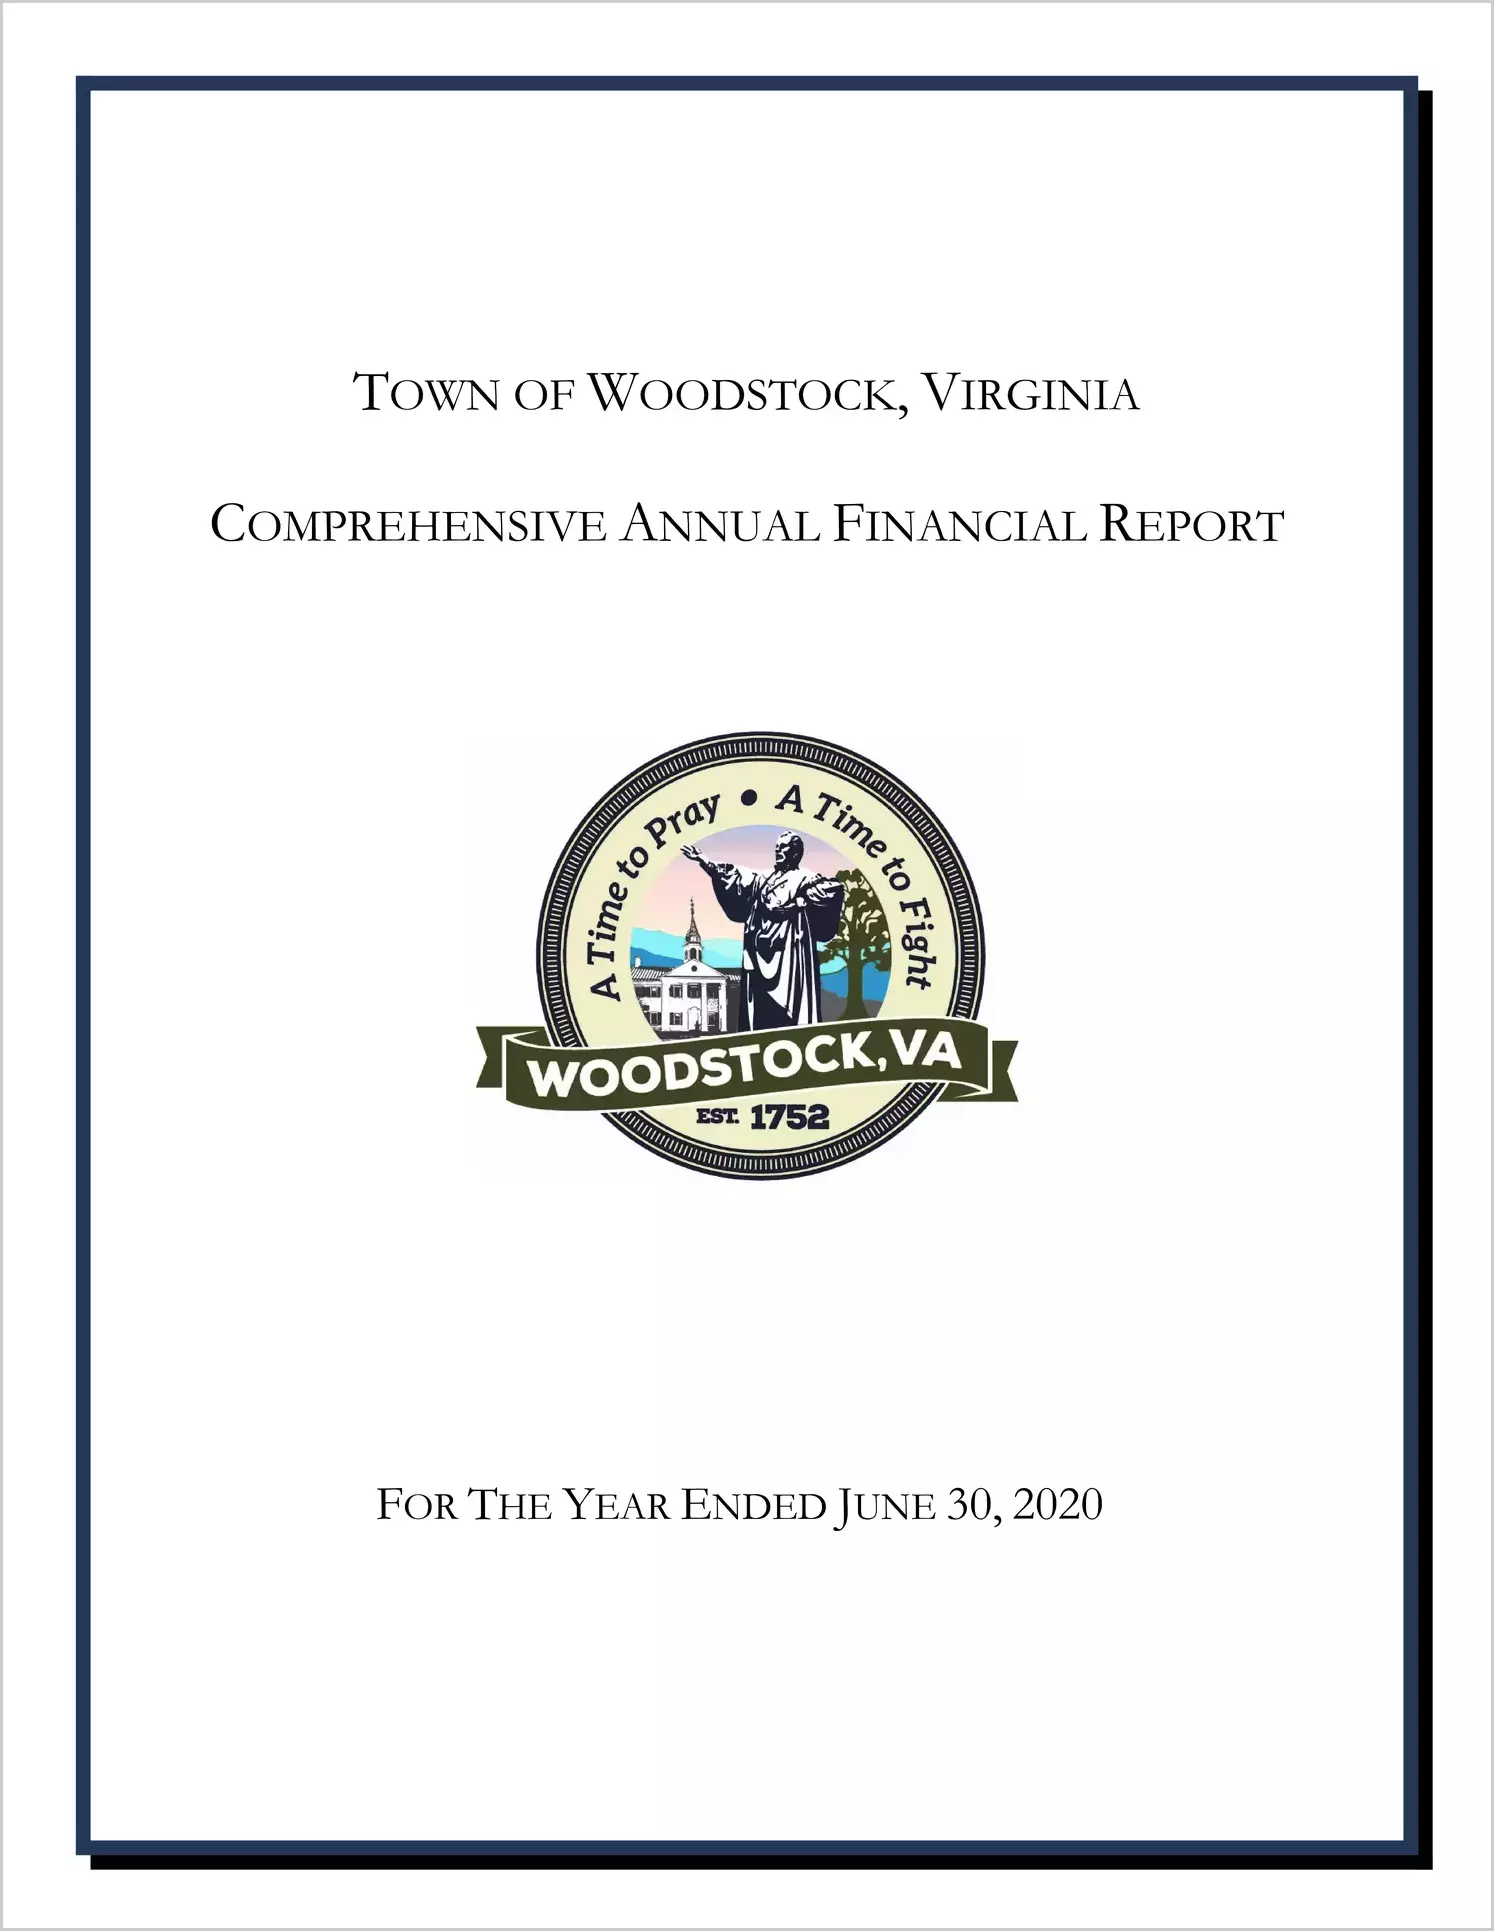 2020 Annual Financial Report for Town of Woodstock